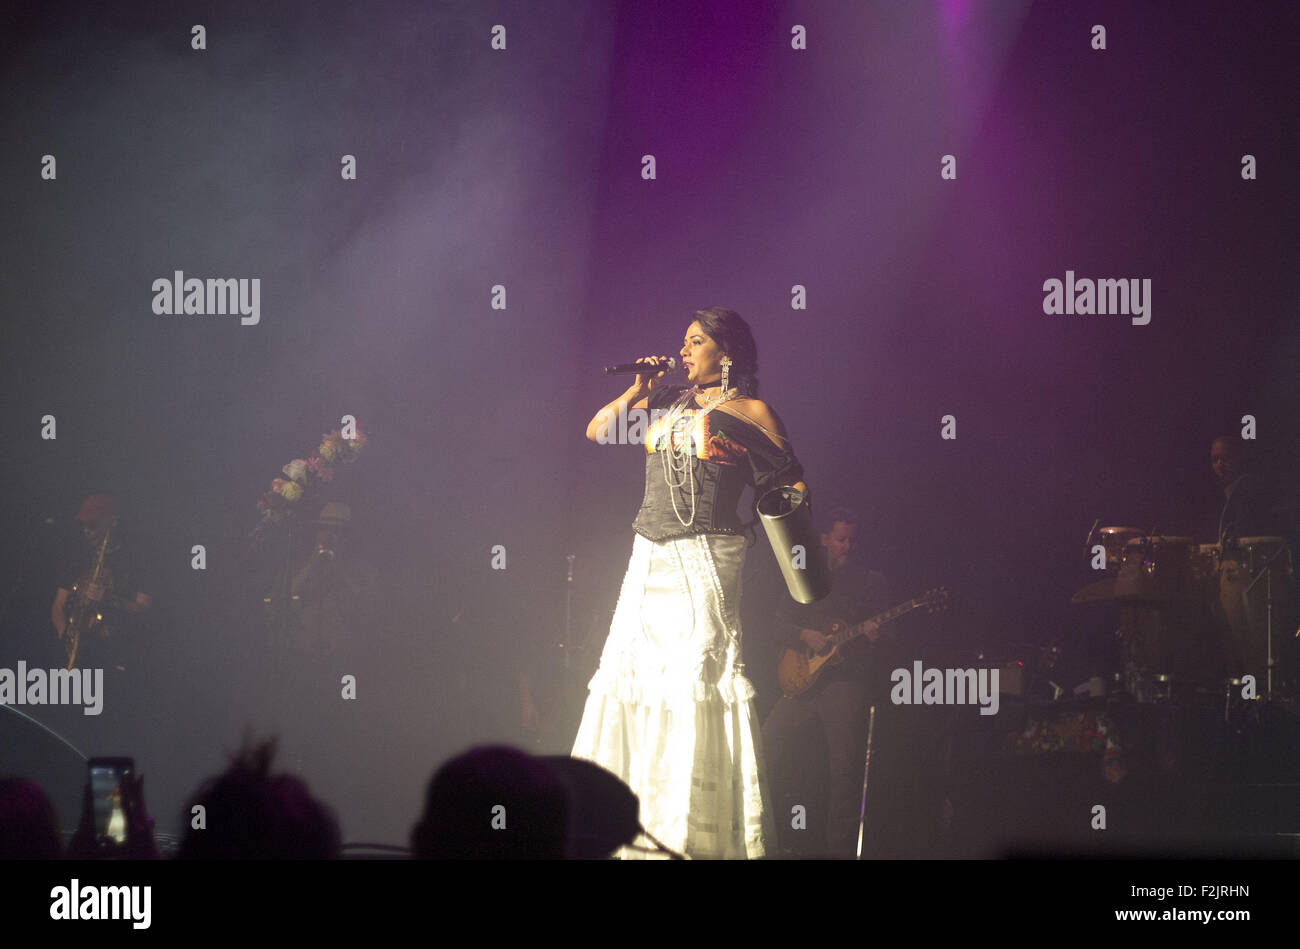 Hollywood, CALIFORNIA, UNITED STATES OF AMERICA. 19th Sep, 2015. Mexican singer Lila Downs performs at the Pantages Theatre on Saturday 19 September 2015 on Hollywood, California.ARMANDO ARORIZO © Armando Arorizo/Prensa Internacional/ZUMA Wire/Alamy Live News Stock Photo